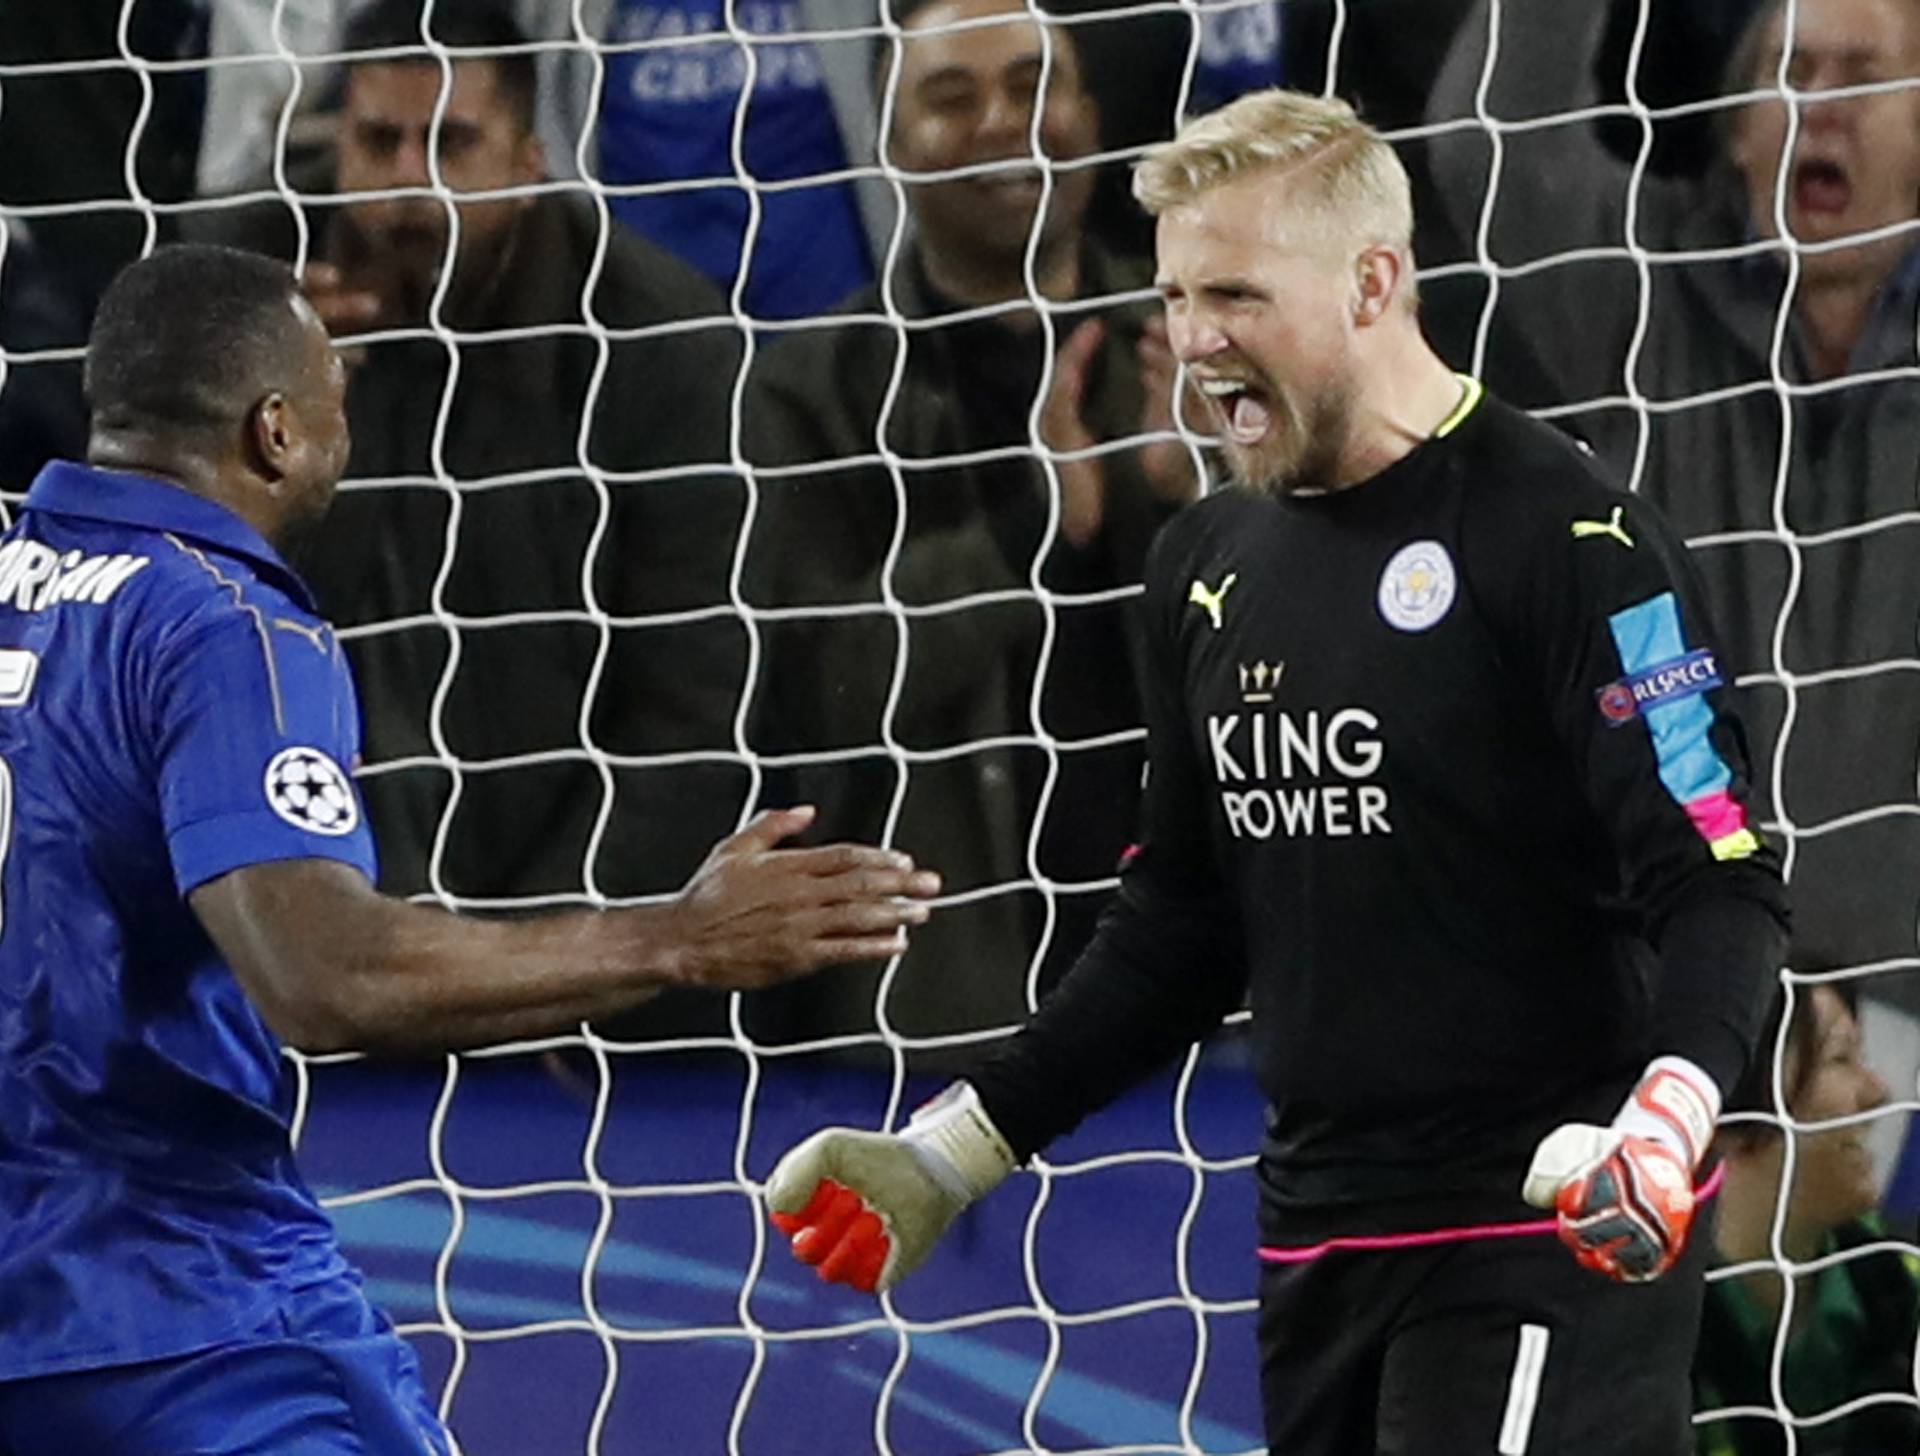 Leicester City's Kasper Schmeichel celebrates with Wes Morgan after saving a penalty